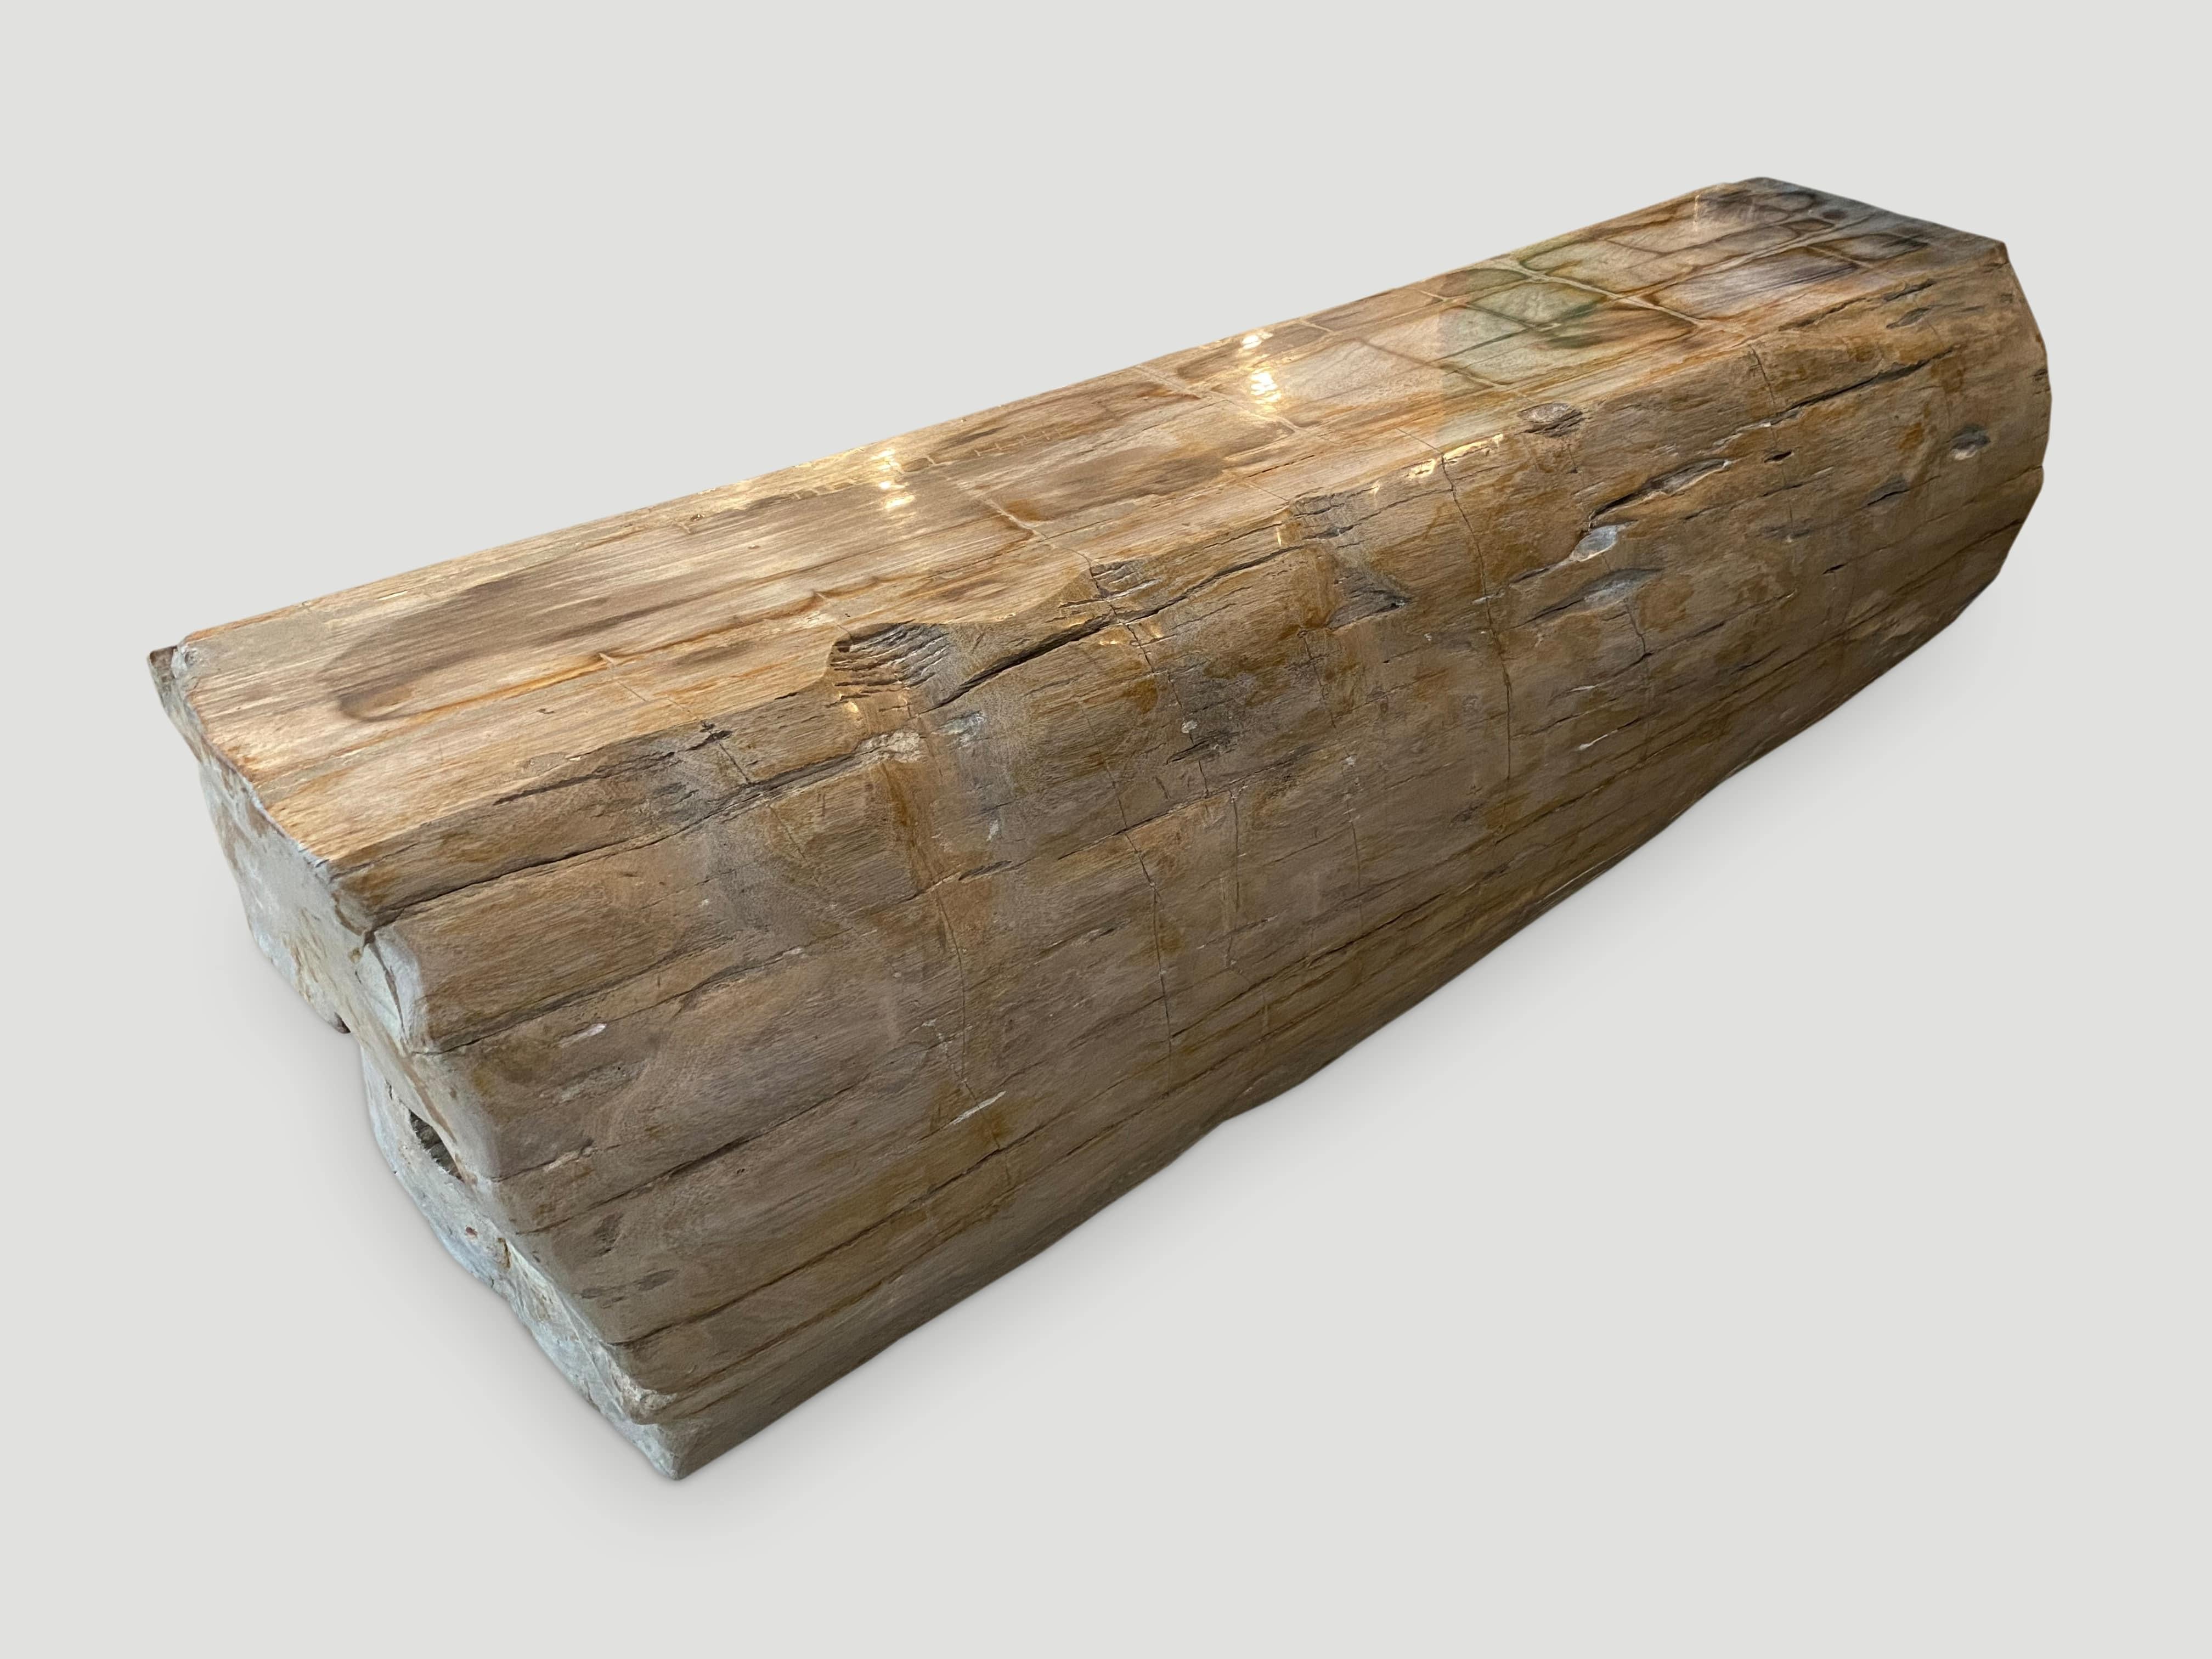 Impressive, high quality petrified wood log bench. It’s fascinating how Mother Nature produces these exquisite 40 million year old petrified teak logs with such beautiful colors and natural patterns throughout. Modern yet with so much history.